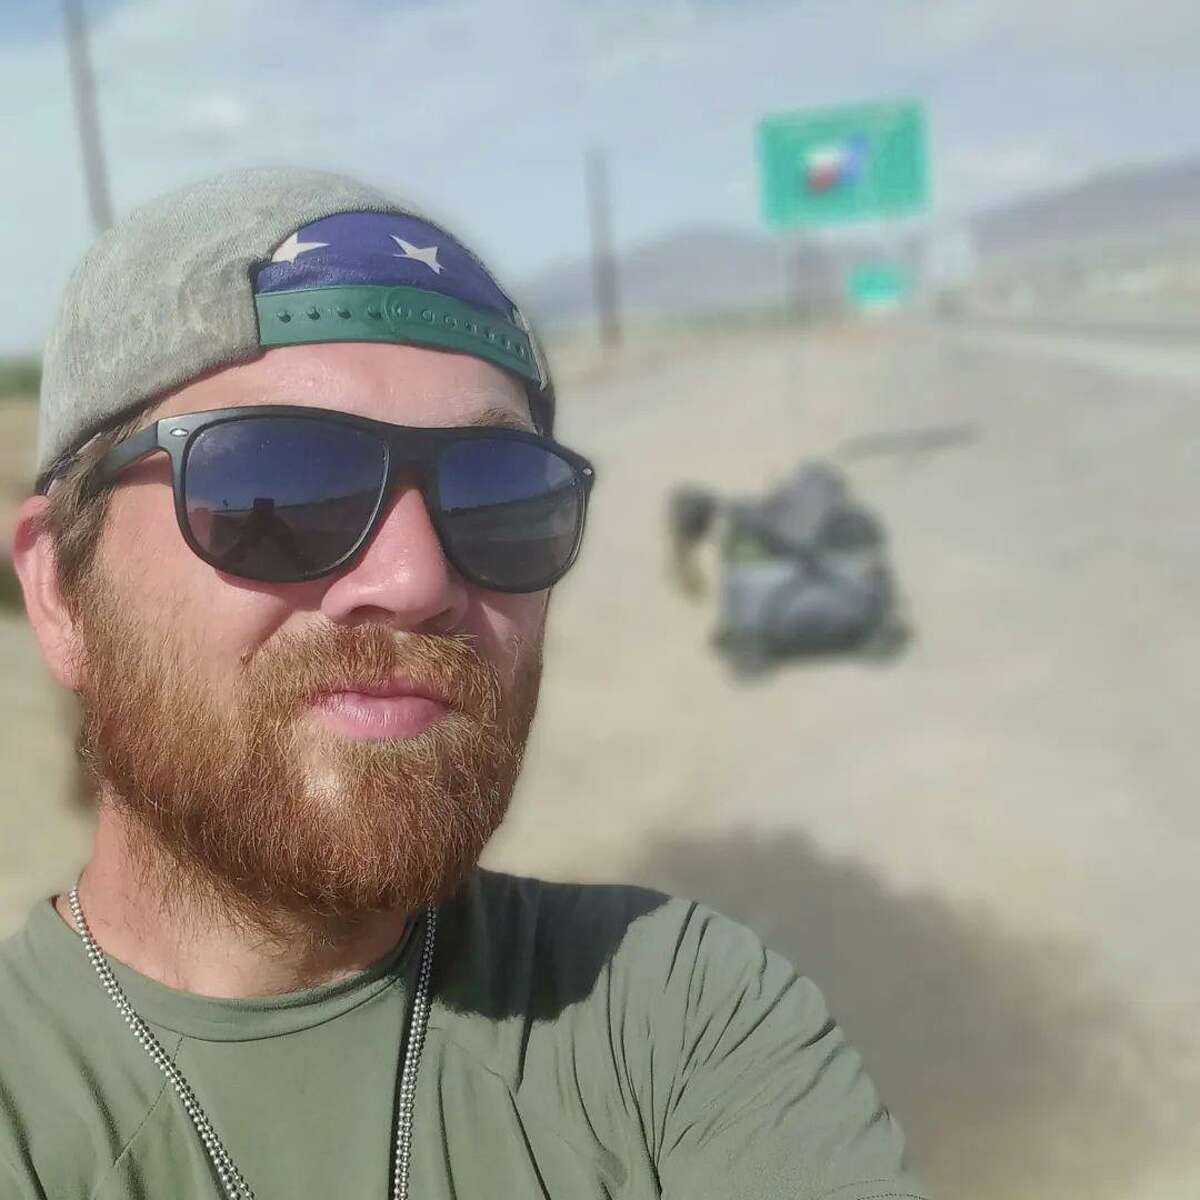 Nicholas Tully-Fern as he enters Texas in El Paso. Tully-Fern is a U.S. Marine Corps veteran who is walking cross country. He began in California Feb. 9 and was in Conroe this week. He’ll finish his walk in Washington D.C. in November.